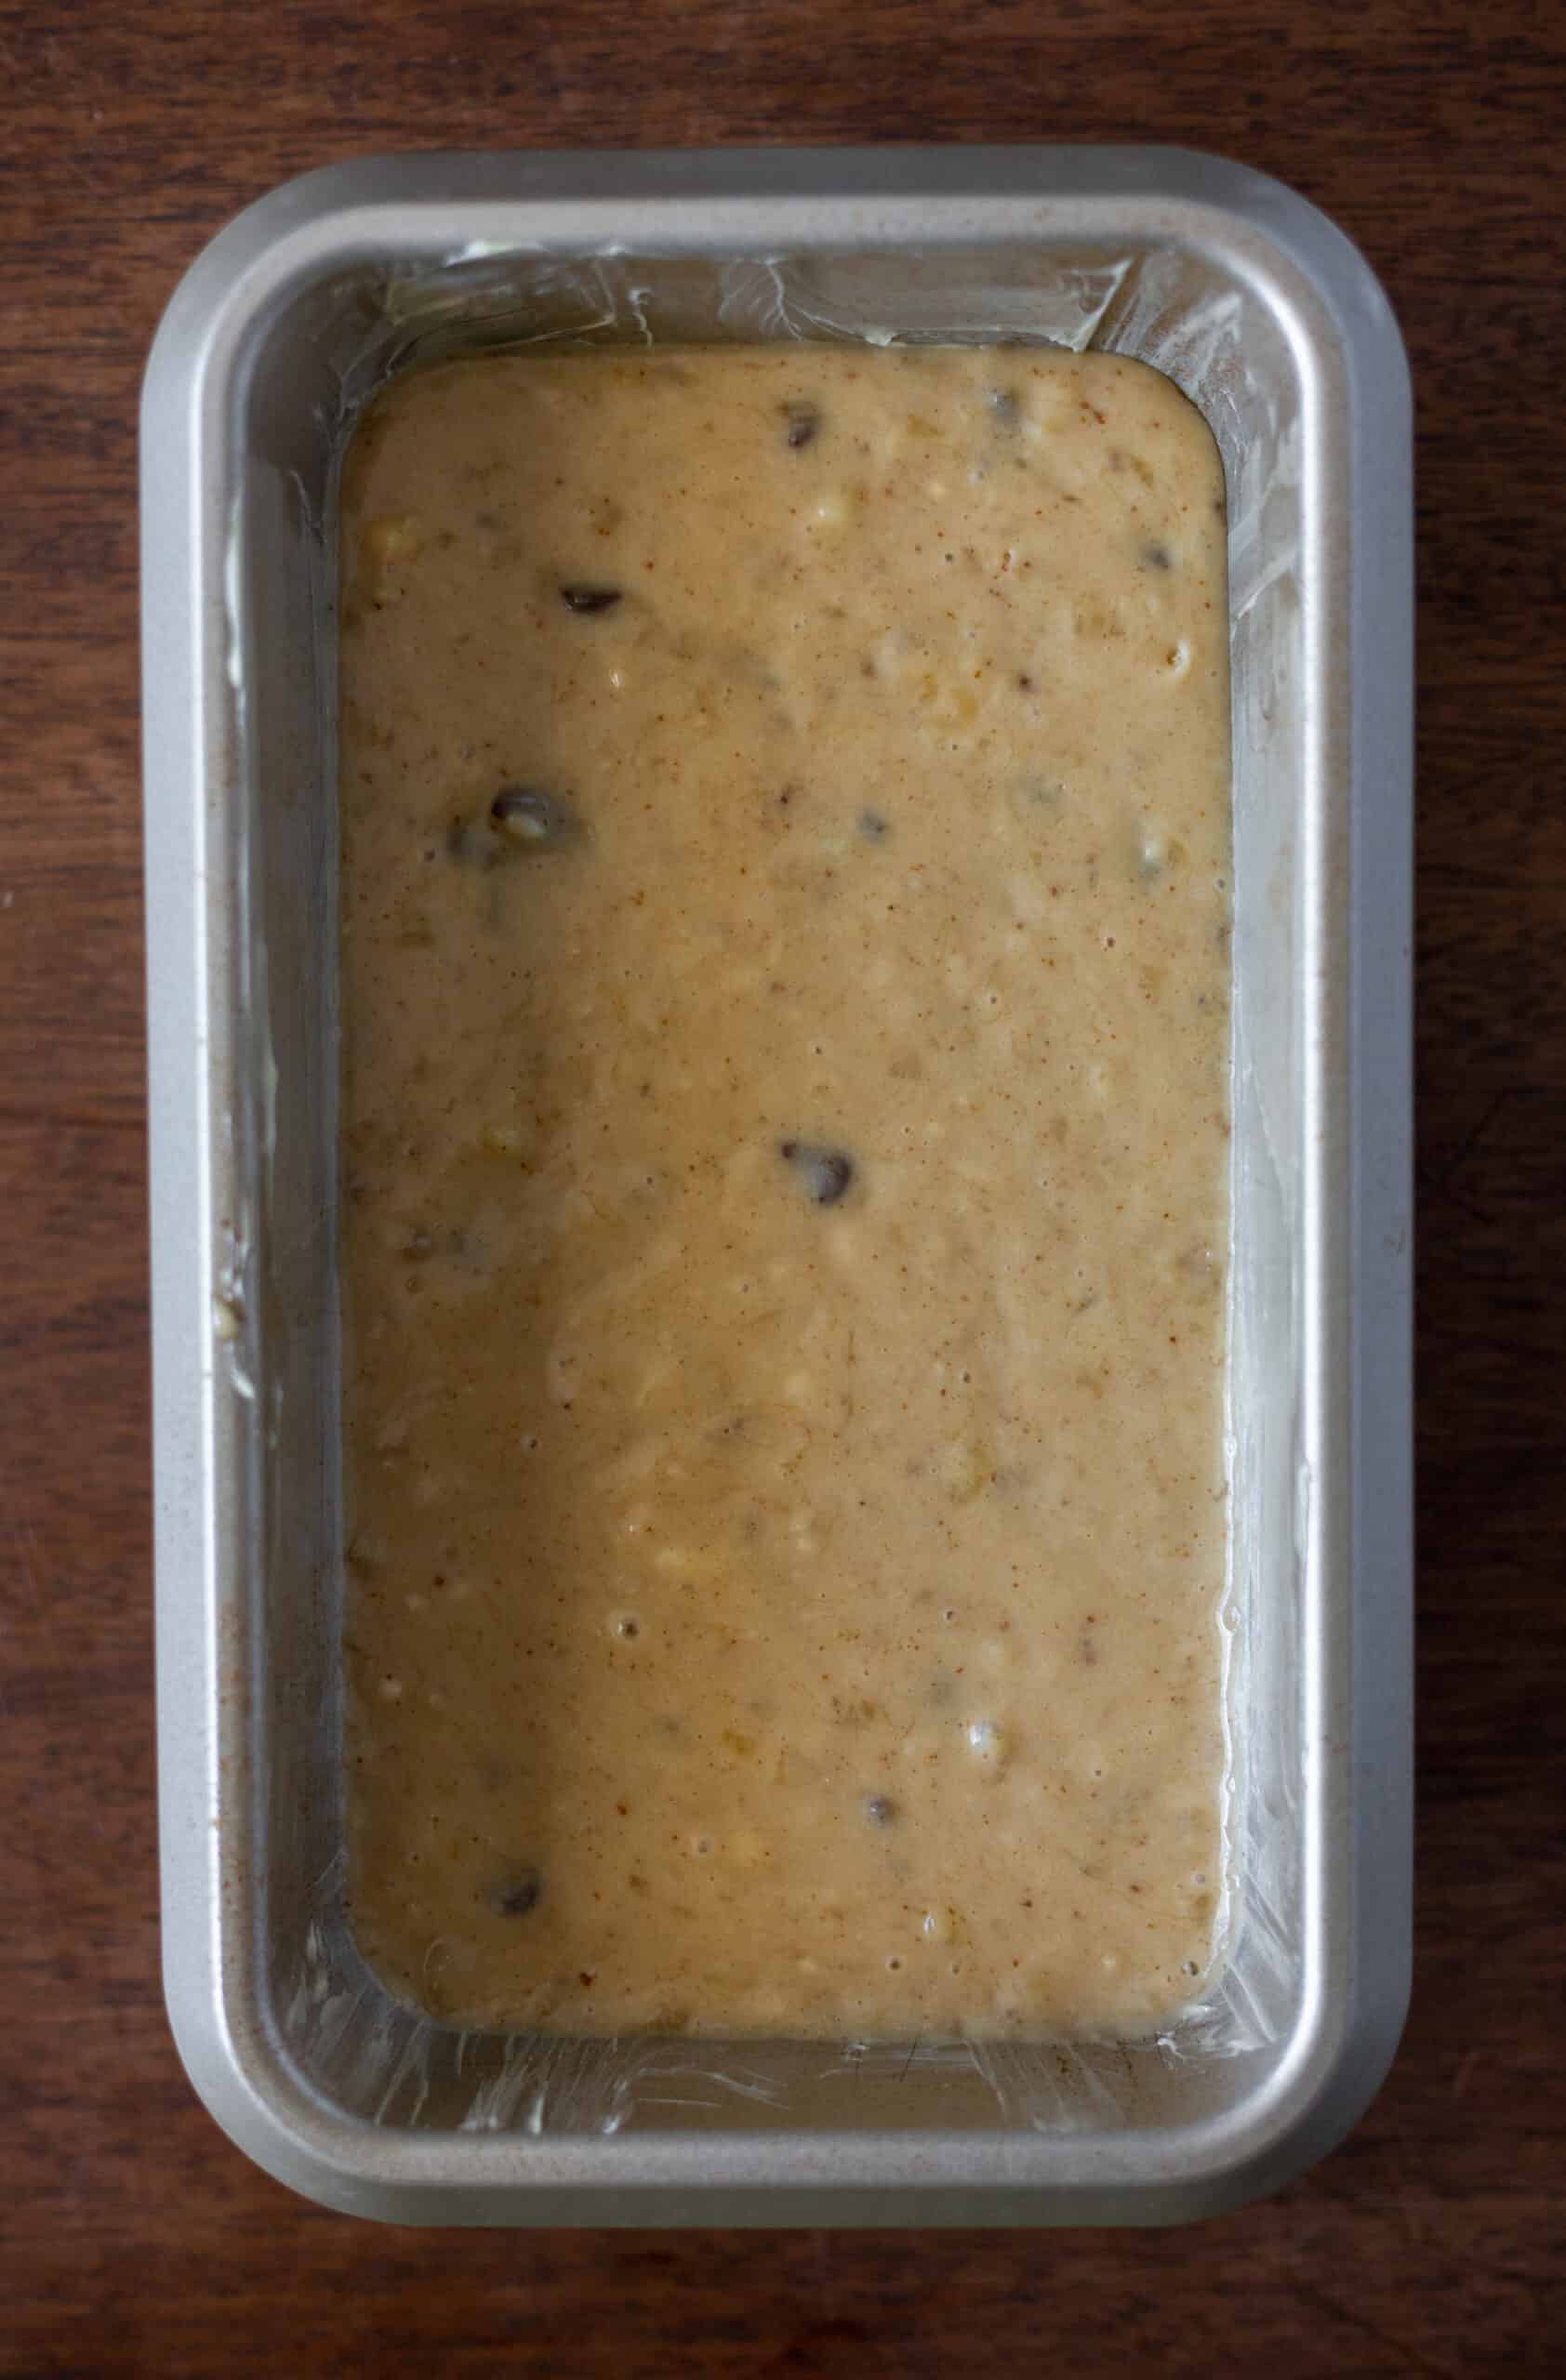 Banana bread batter poured into greased loaf pan